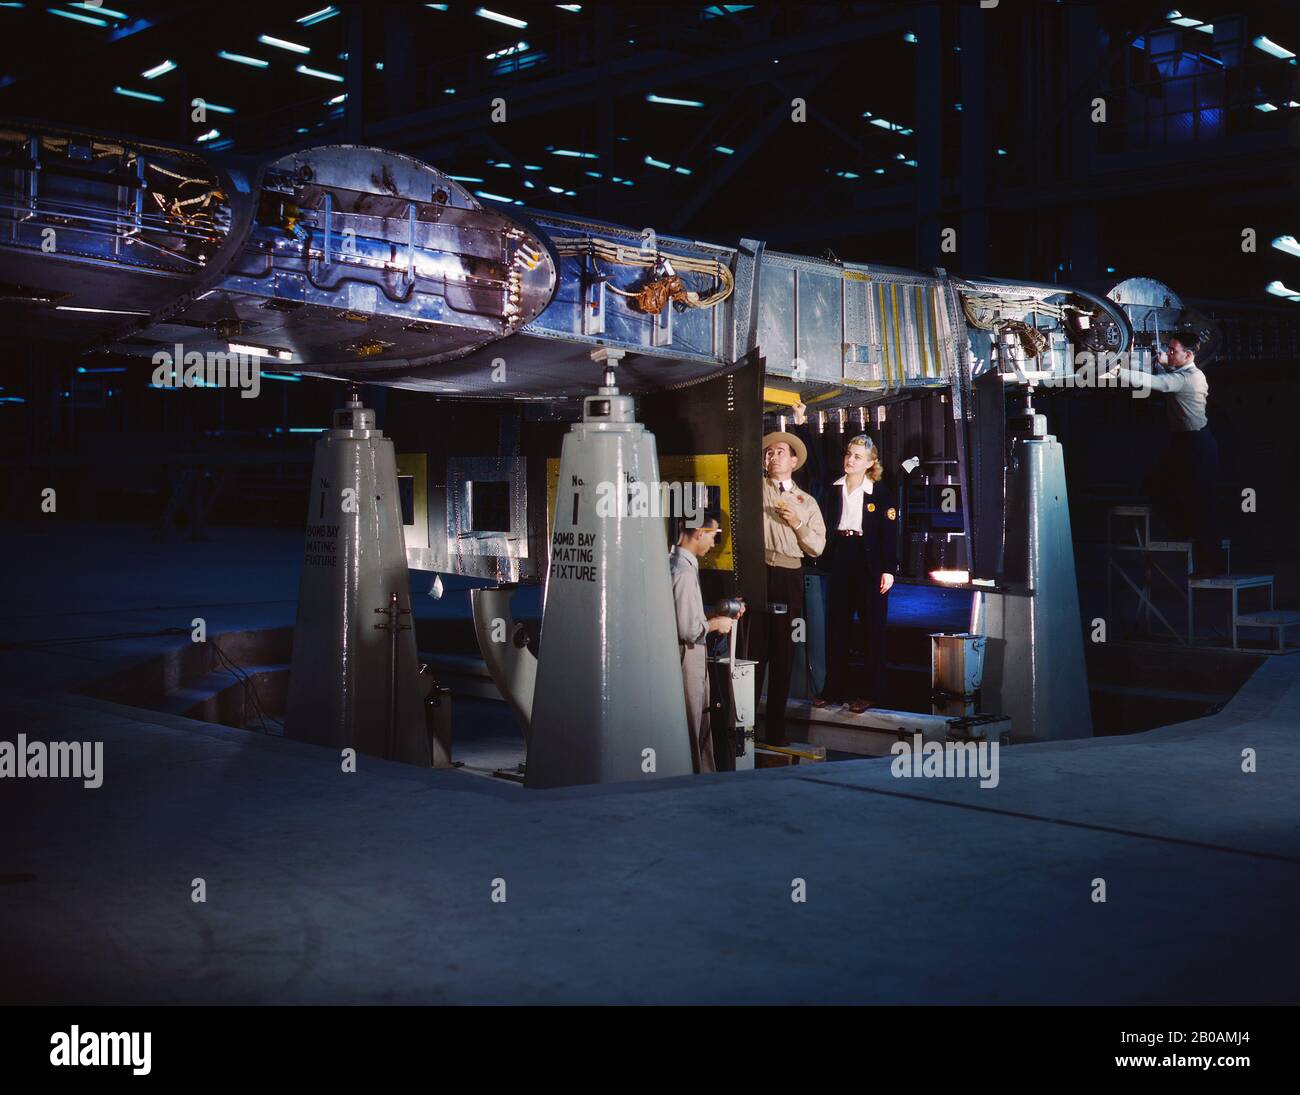 War Production Workers working on Wing of Consolidated Liberator Bomber, Consolidated Aircraft Corp., Fort Worth, Texas, USA, photograph by Howard R. Hollem, U.S. Office of War Information, October 1942 Stock Photo